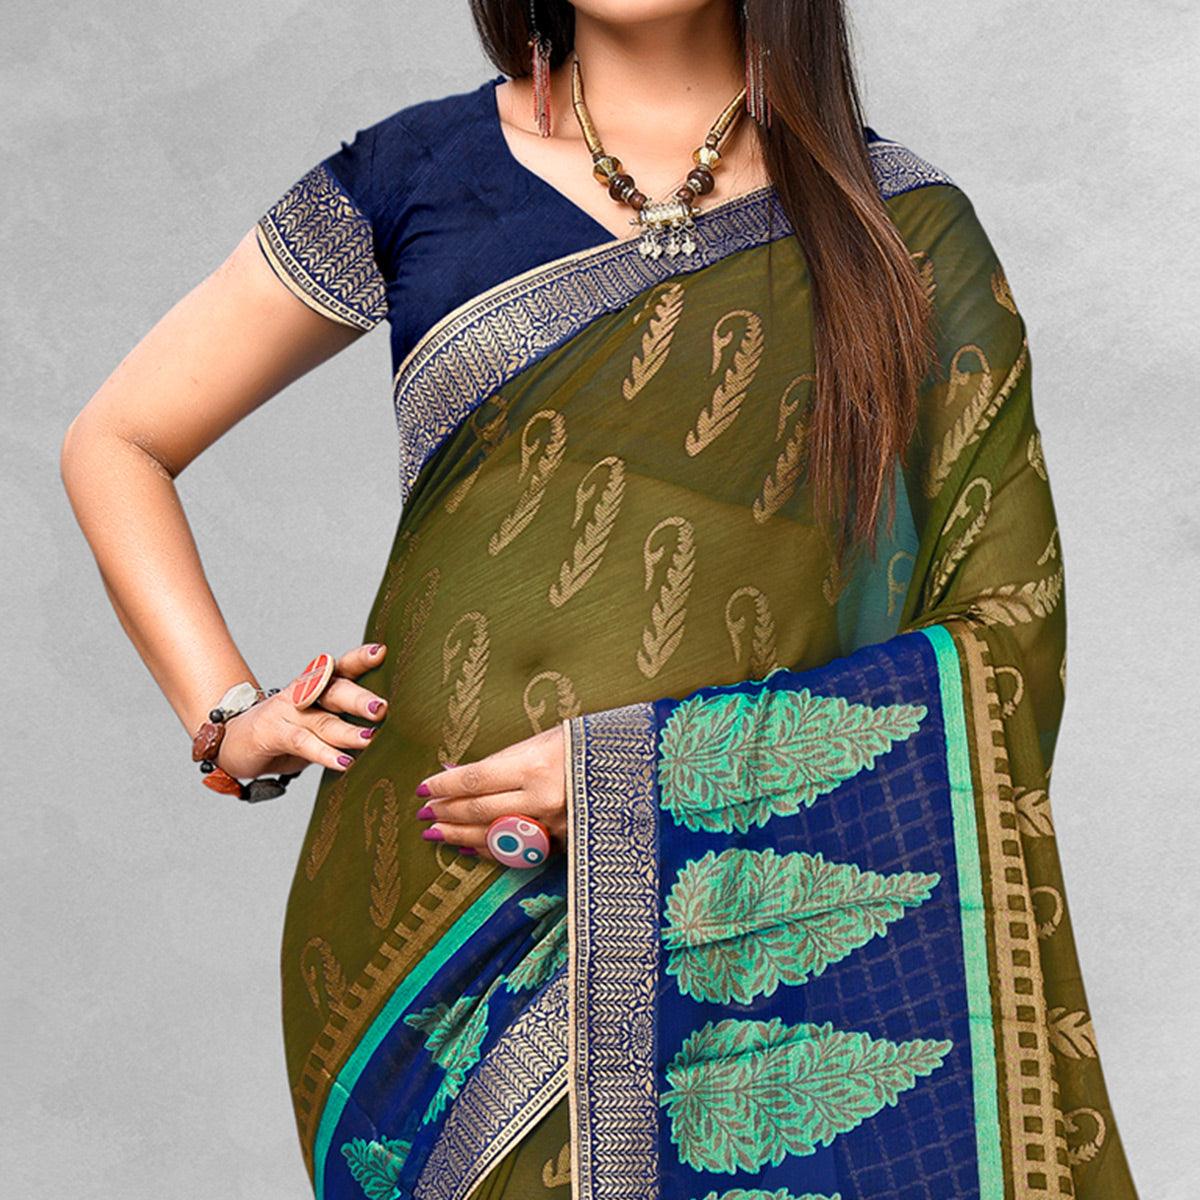 Glowing Olive Green Colored Casual Wear Printed Brasso Saree - Peachmode